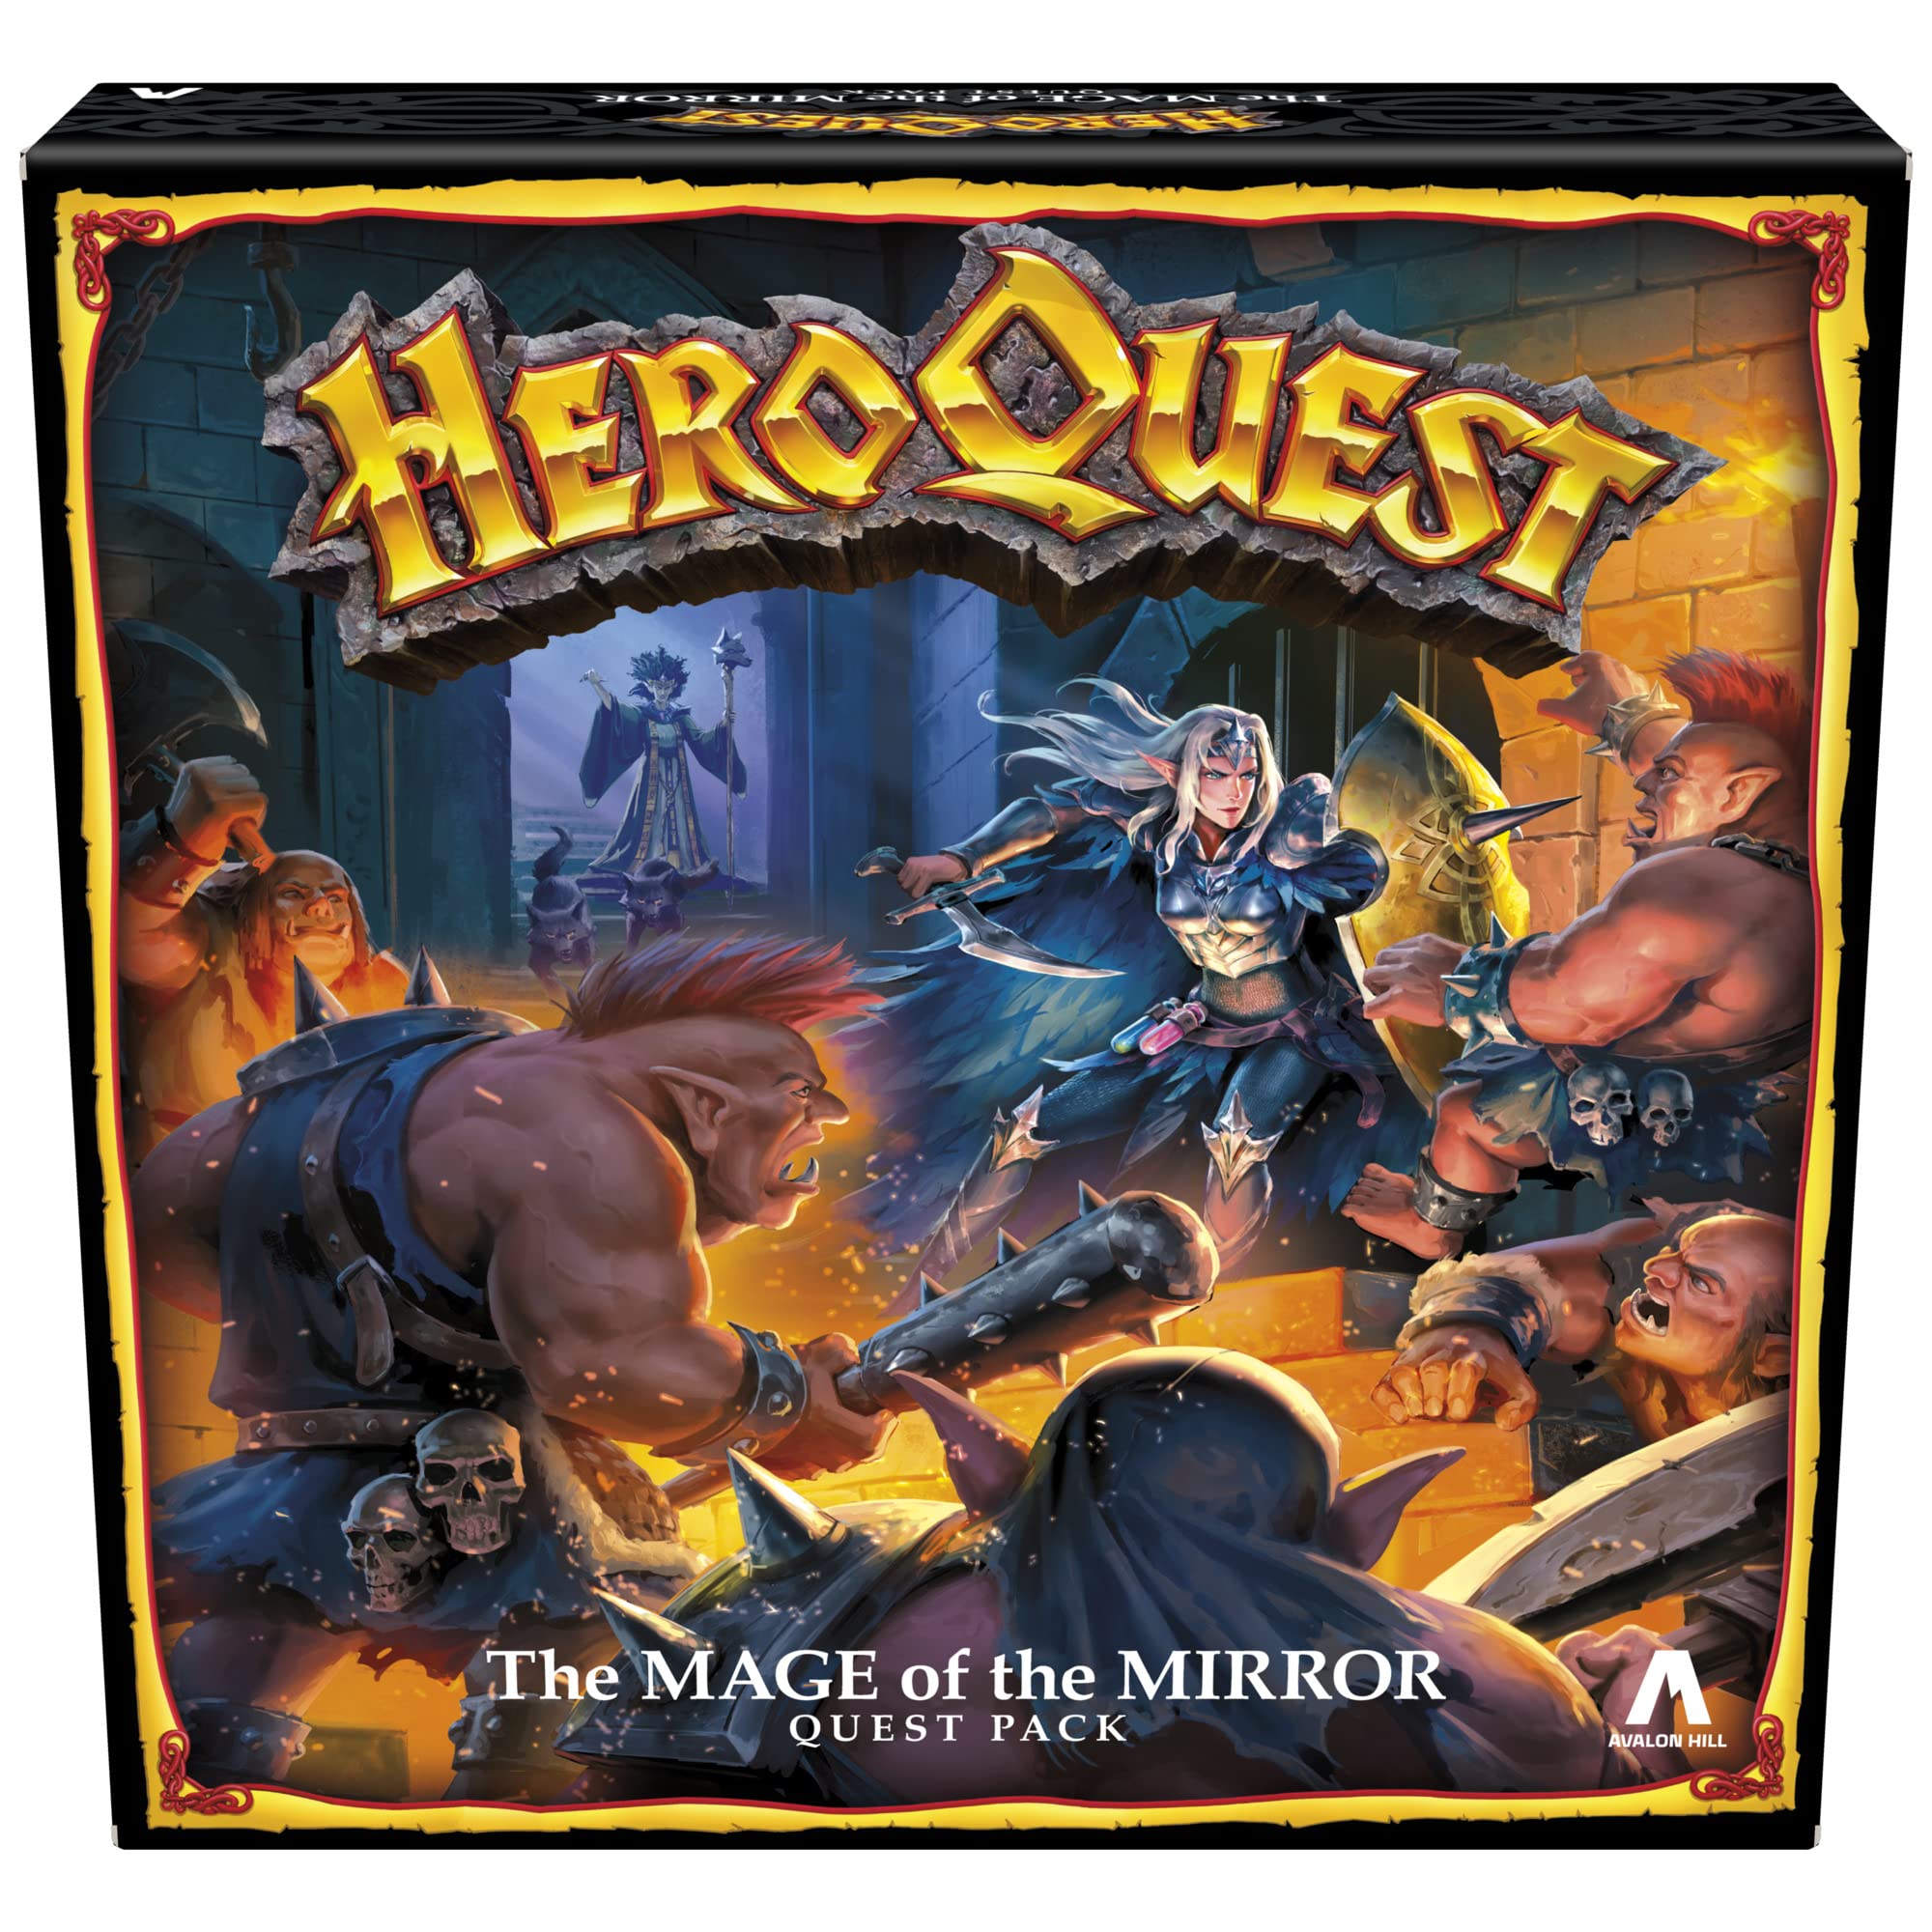 Heroquest The Mage of The Mirror Quest Pack, Roleplaying Game for Ages 14+, Requires HeroQuest Game System to Play